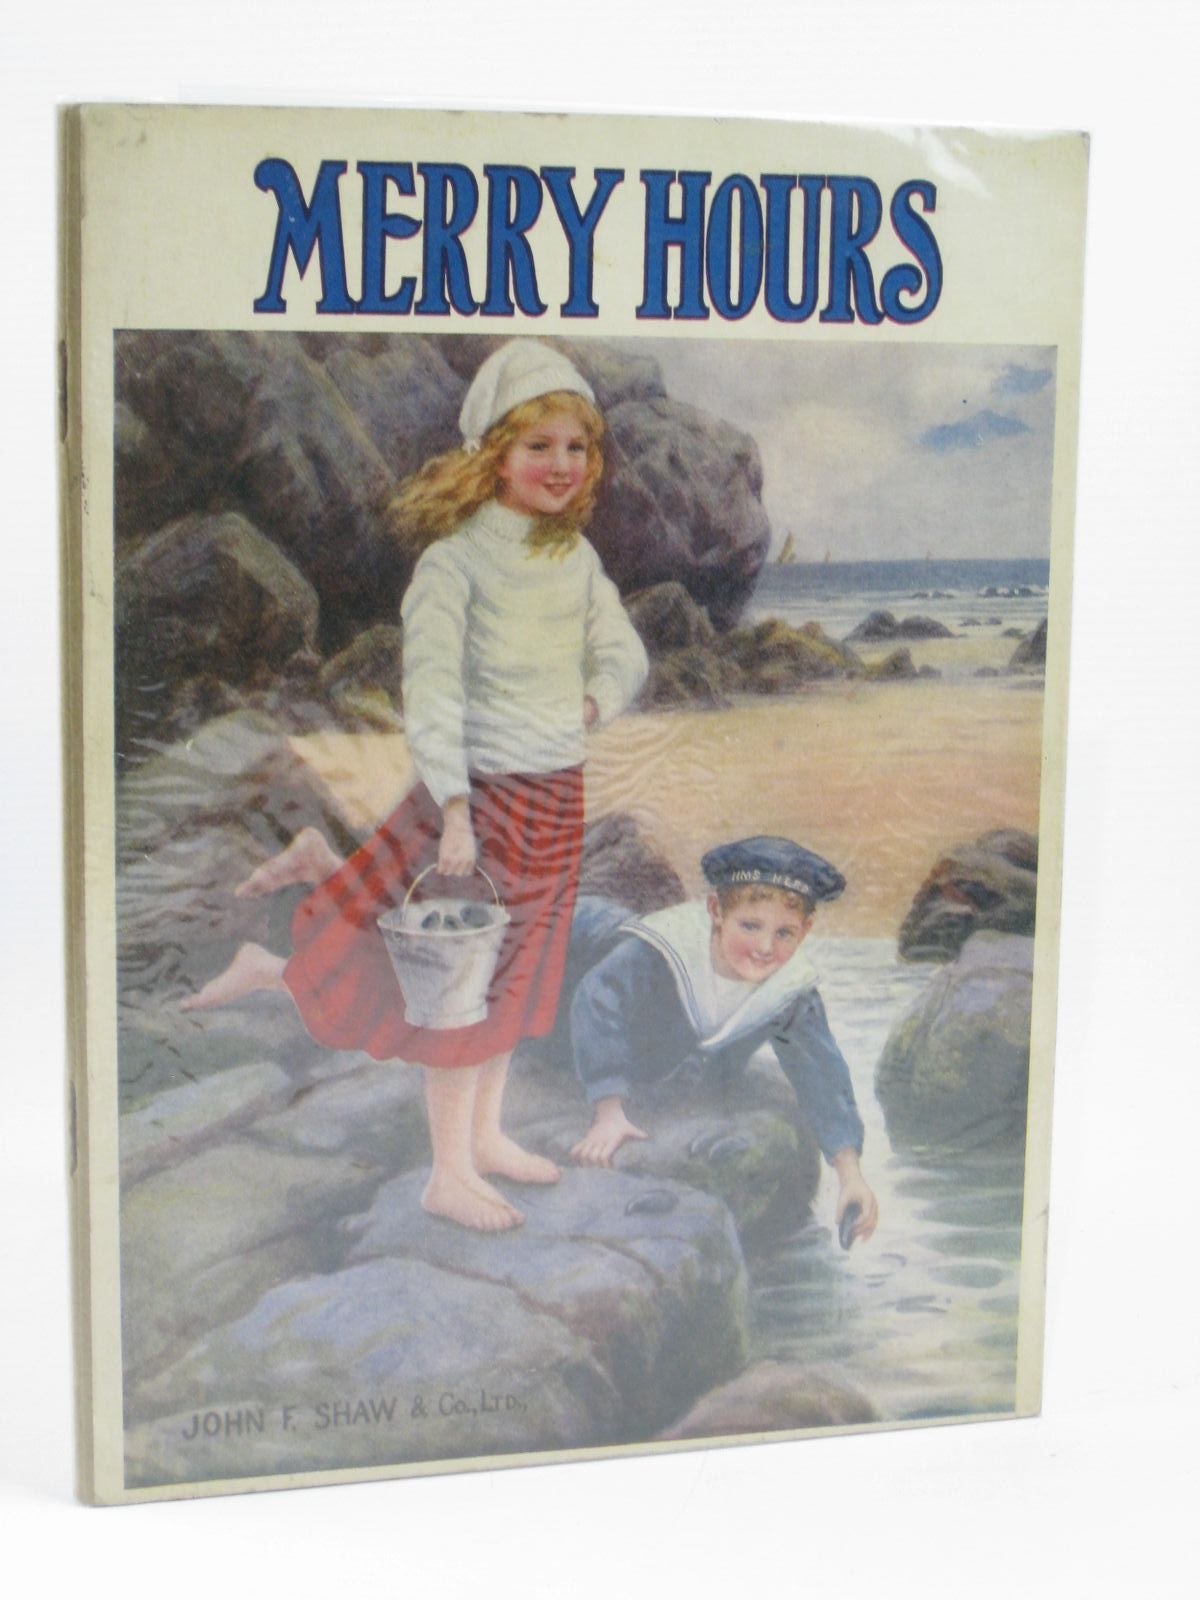 Photo of MERRY HOURS written by Mackintosh, Mabel illustrated by Wain, Louis
et al., published by John F. Shaw & Co Ltd. (STOCK CODE: 1506815)  for sale by Stella & Rose's Books